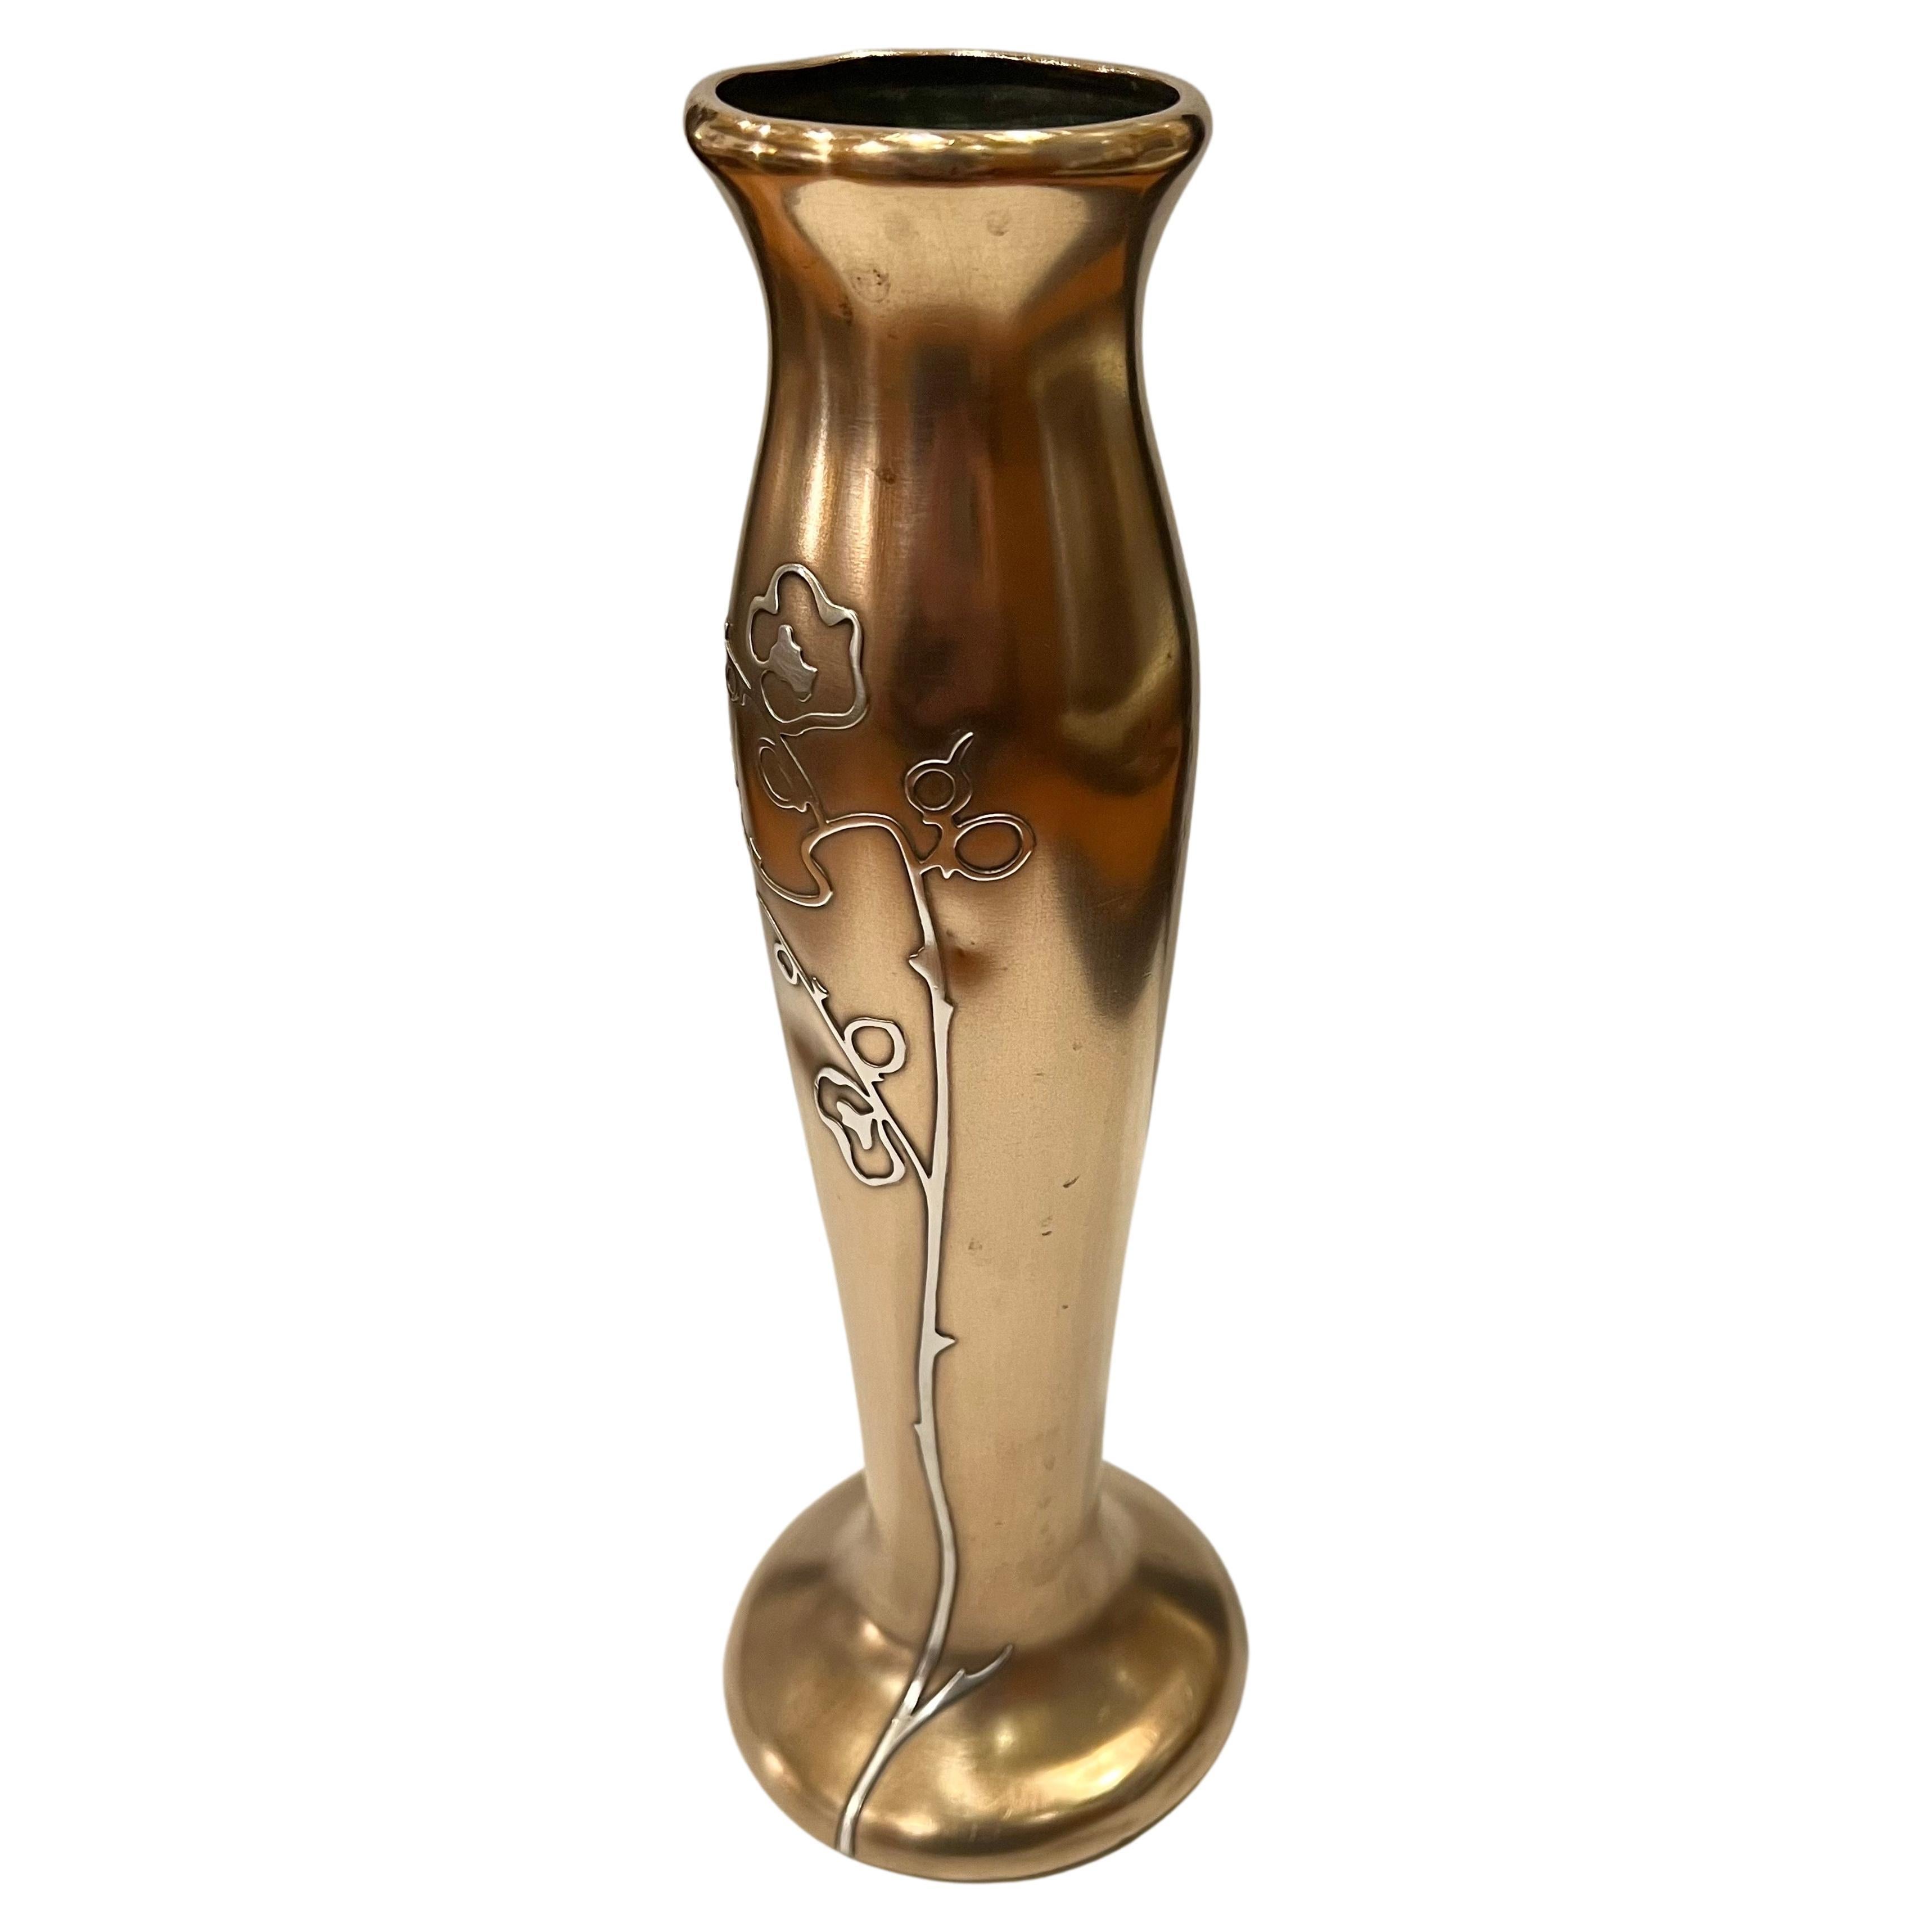 This vase was designed and handcrafted by the artisans at Heintz Art Metal Shop circa 1915. hand forged in bronze, the vase has a conical shape with a flared base and lip. A delicately articulated allium with a sinuously curved stem and leaves is